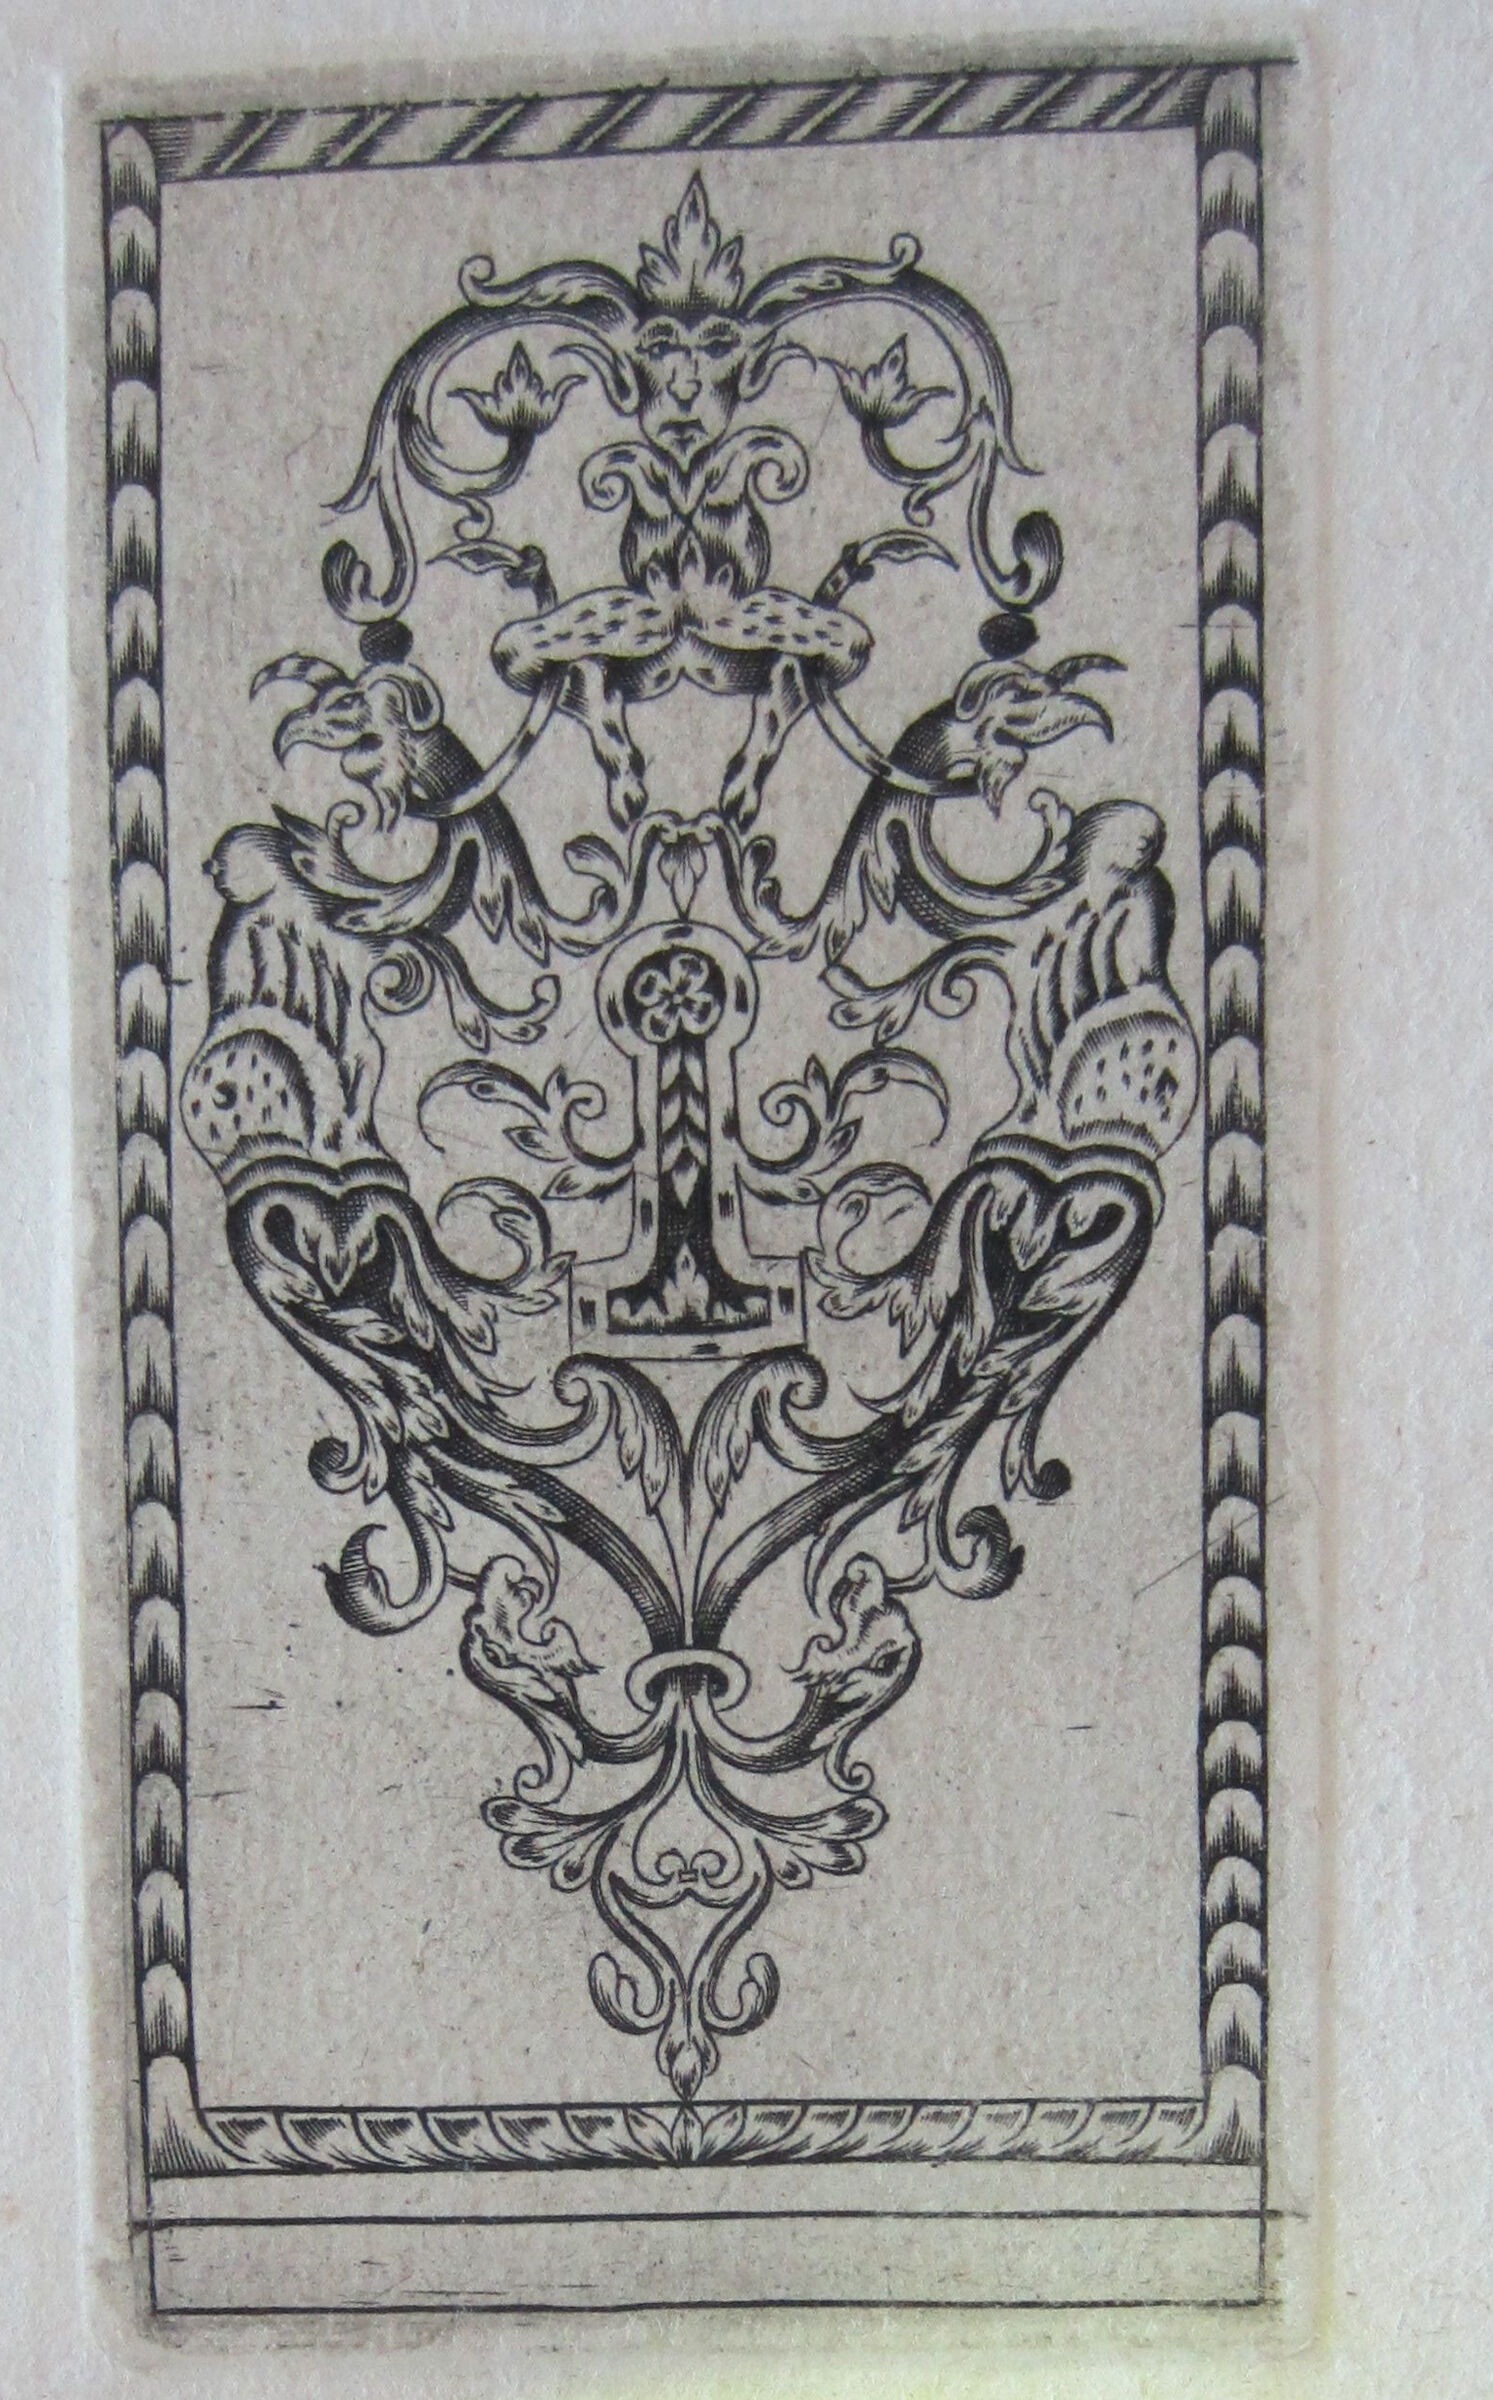 Escutcheon With A Dappled Monster Squatting Above The Keyhole Ornamented With A Four-Petaled Flower